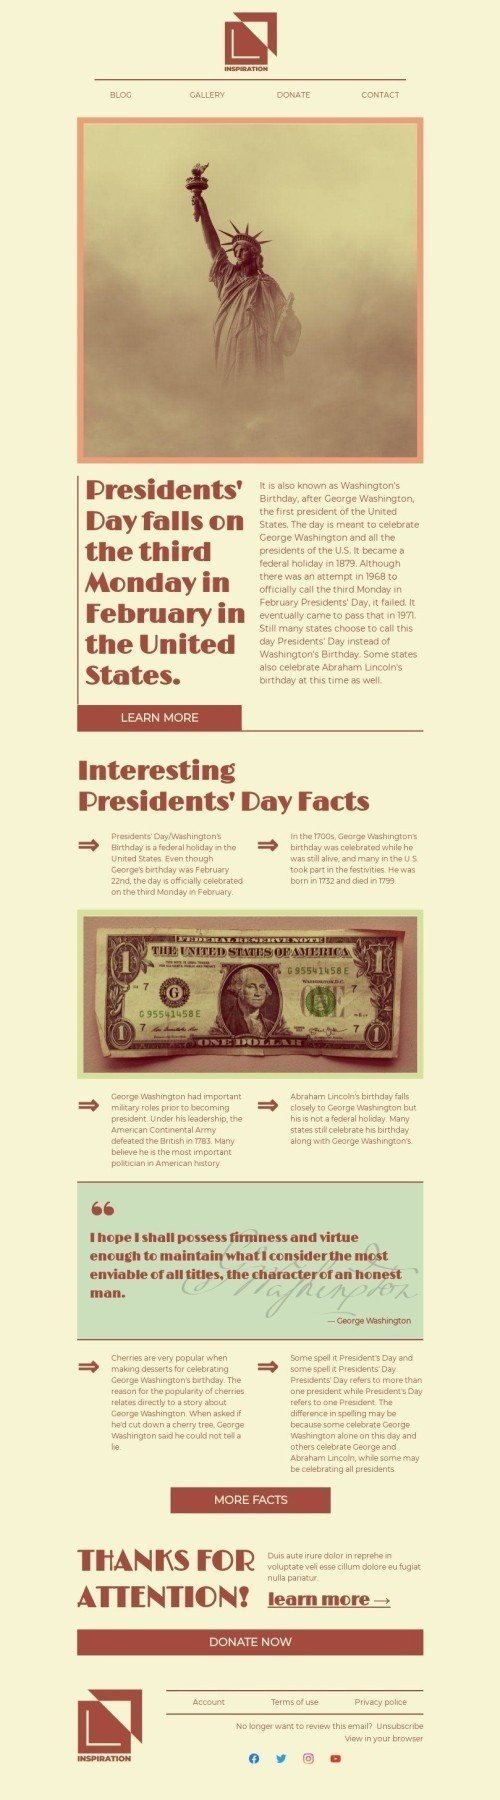 Presidents' Day Email Template «Washington's Birthday» for Publications & Blogging industry desktop view